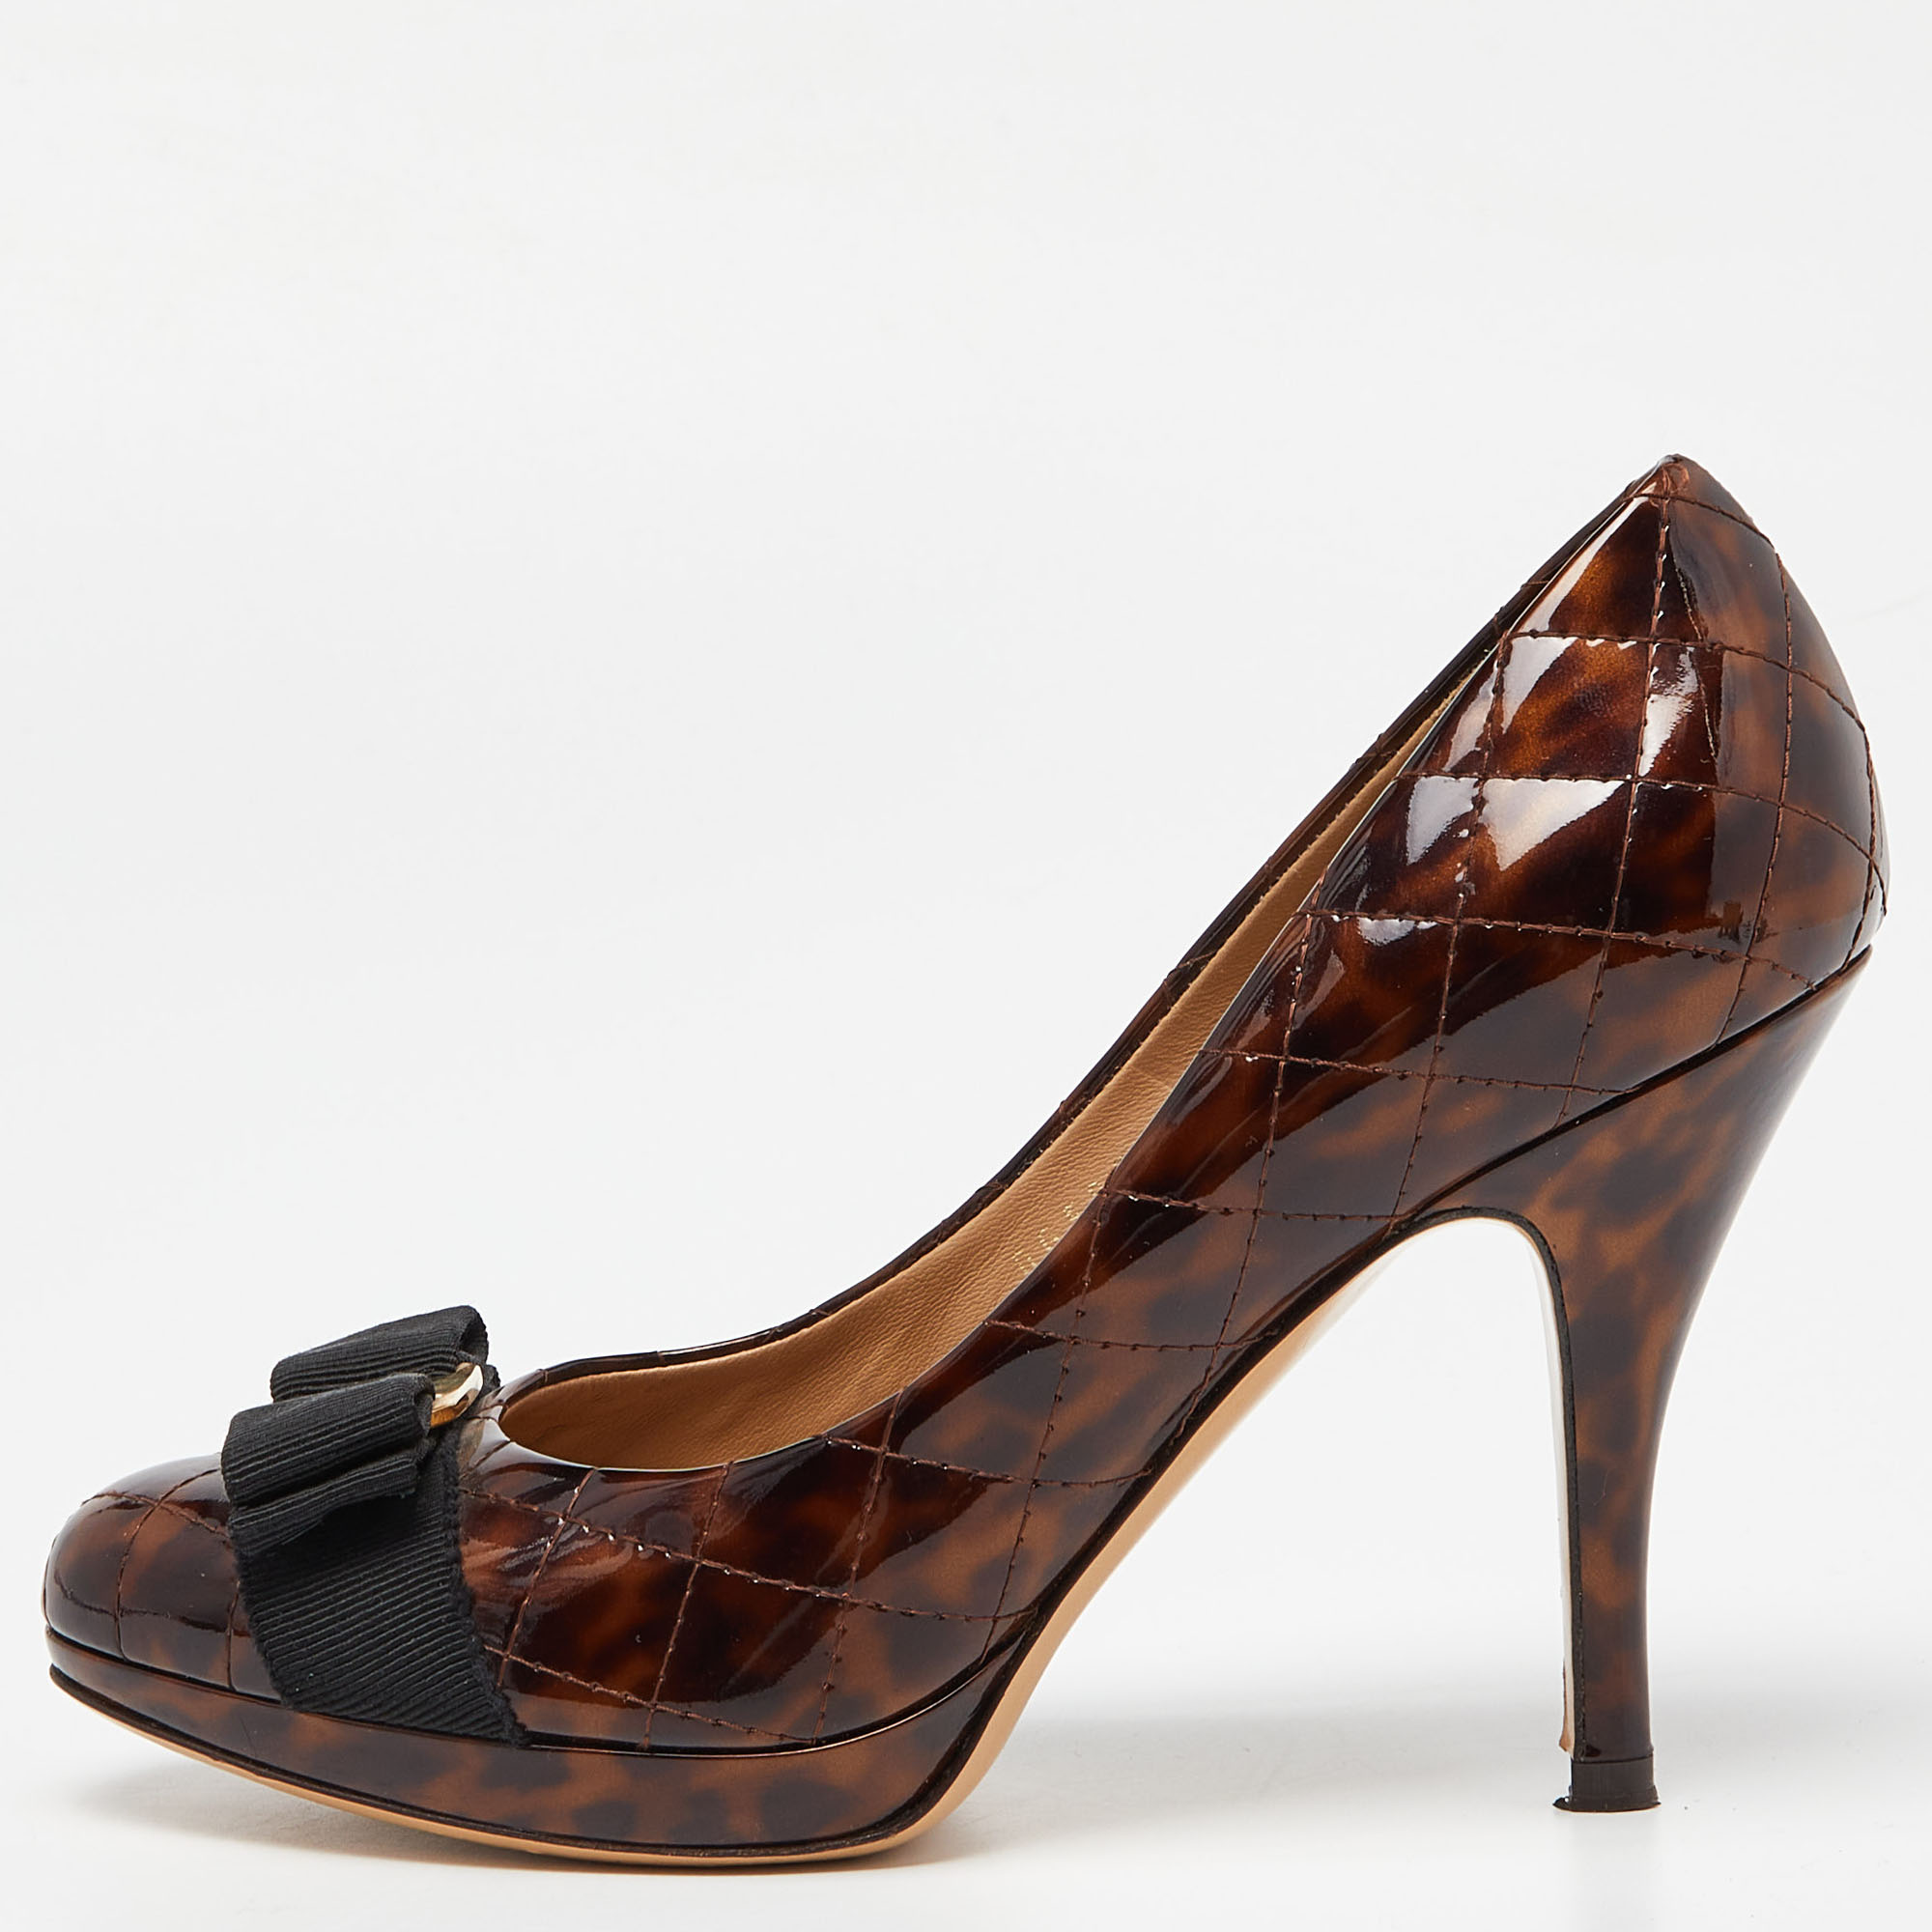 Pumps like these will help you walk with confidence and elegance. Crafted from high quality materials these pumps are set on tall heels. Style them with your formal or dressy outfits.